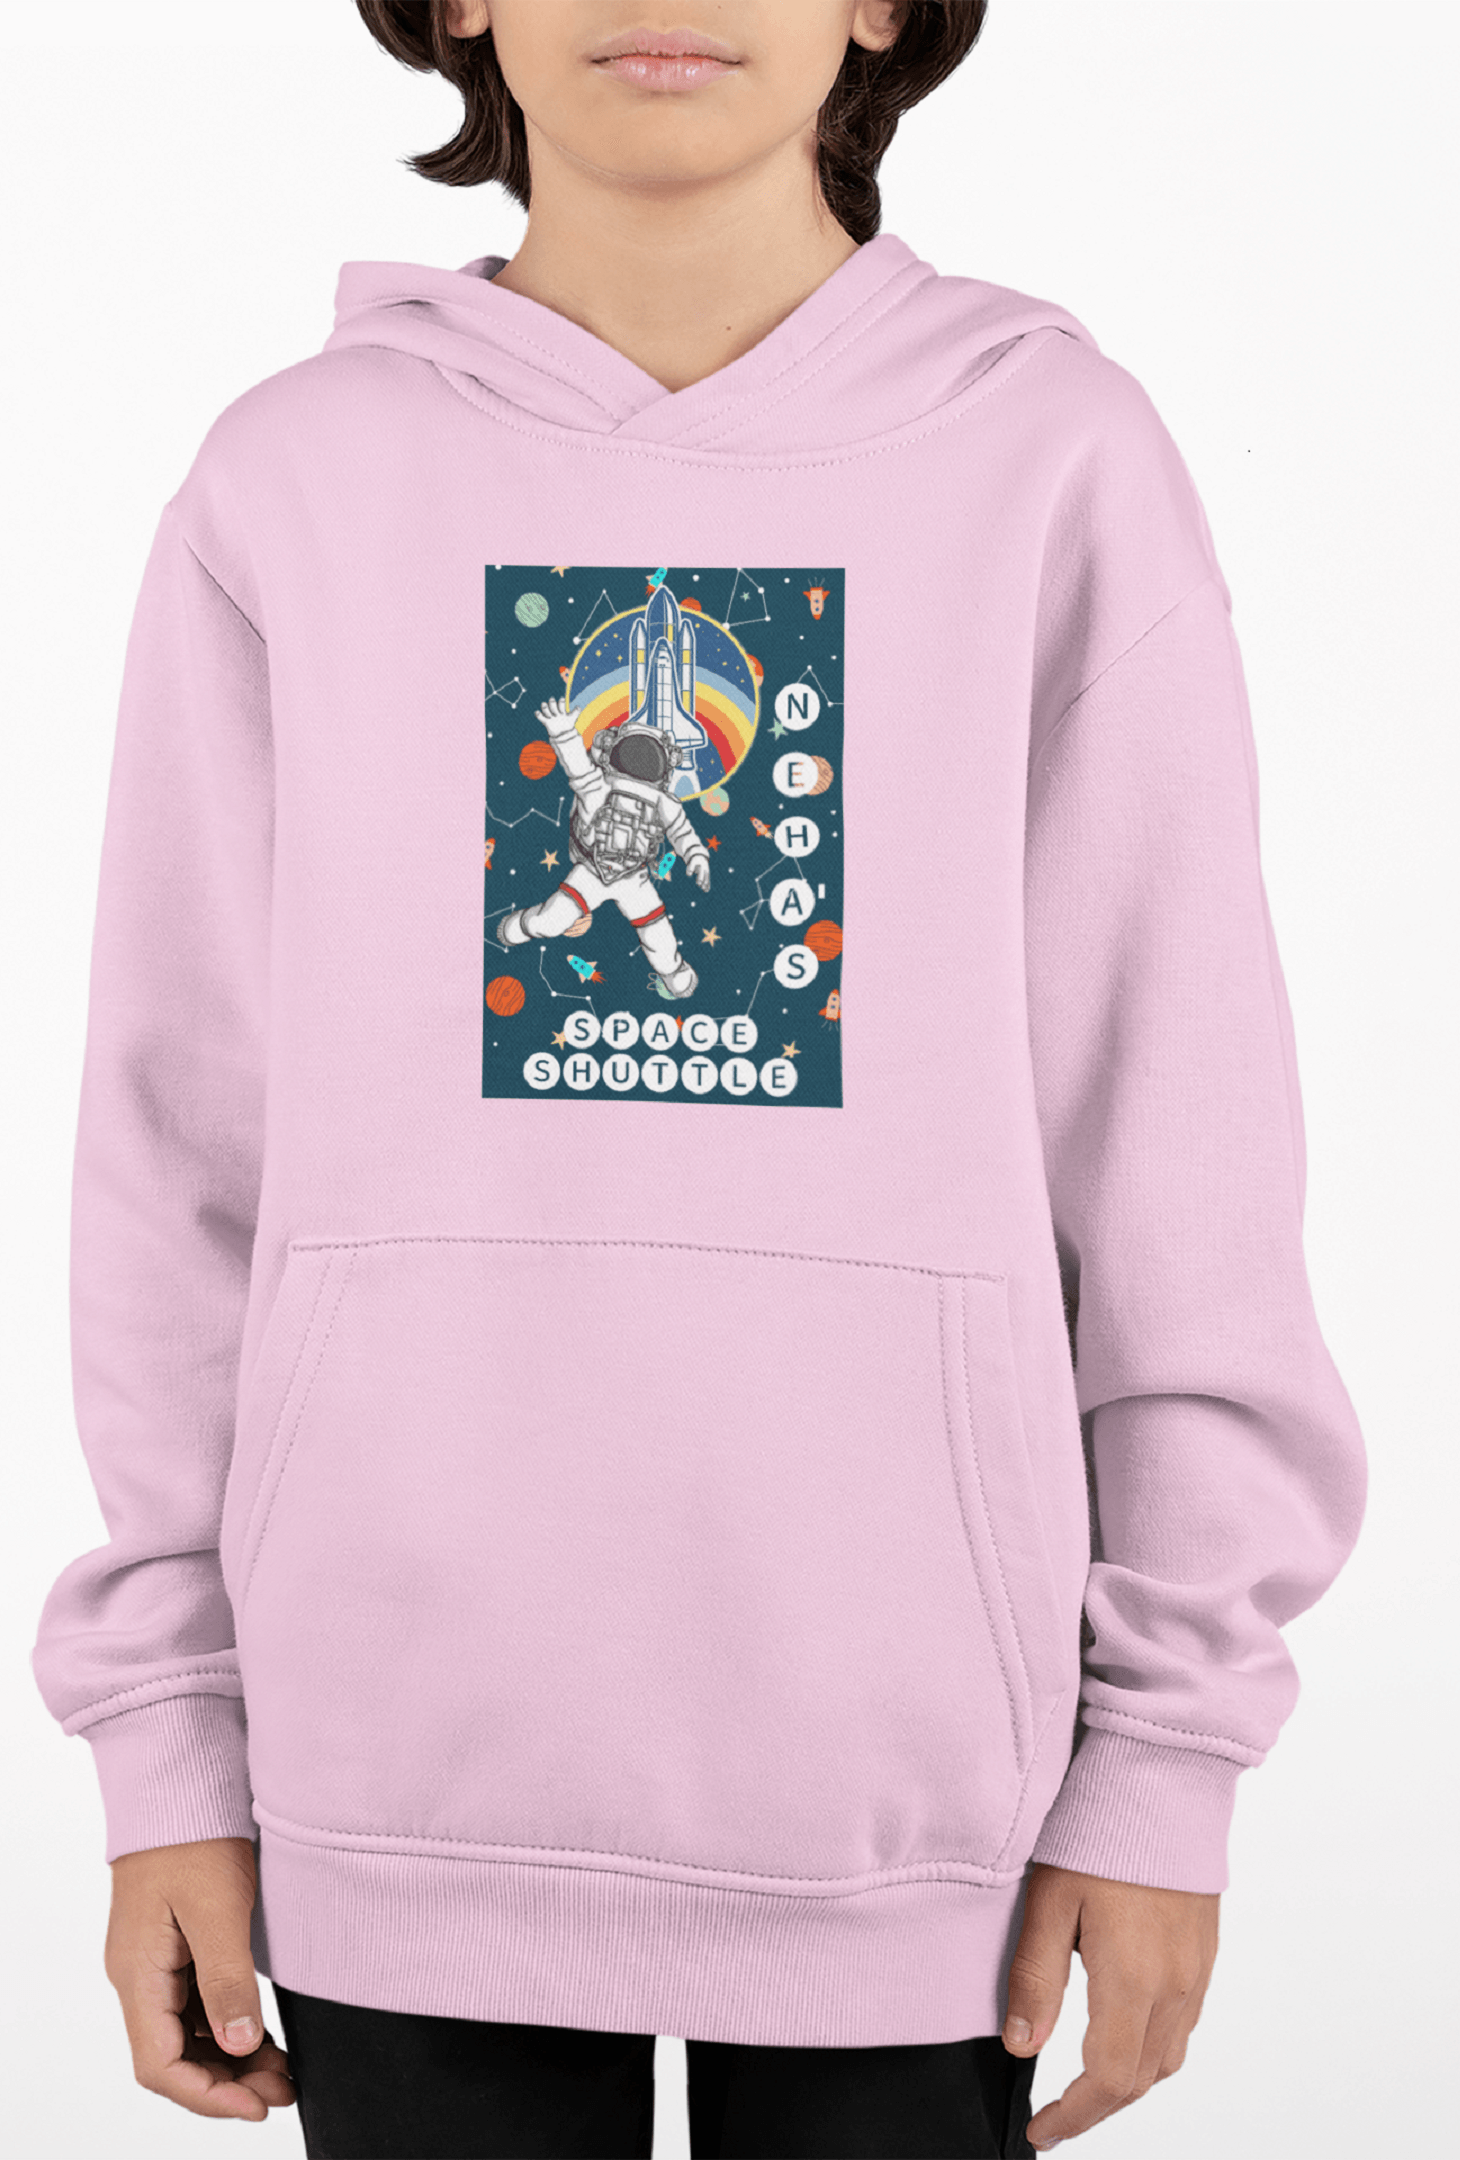 Personalized Pink Hoodie for Kids with Astronaut Space Shuttle Design